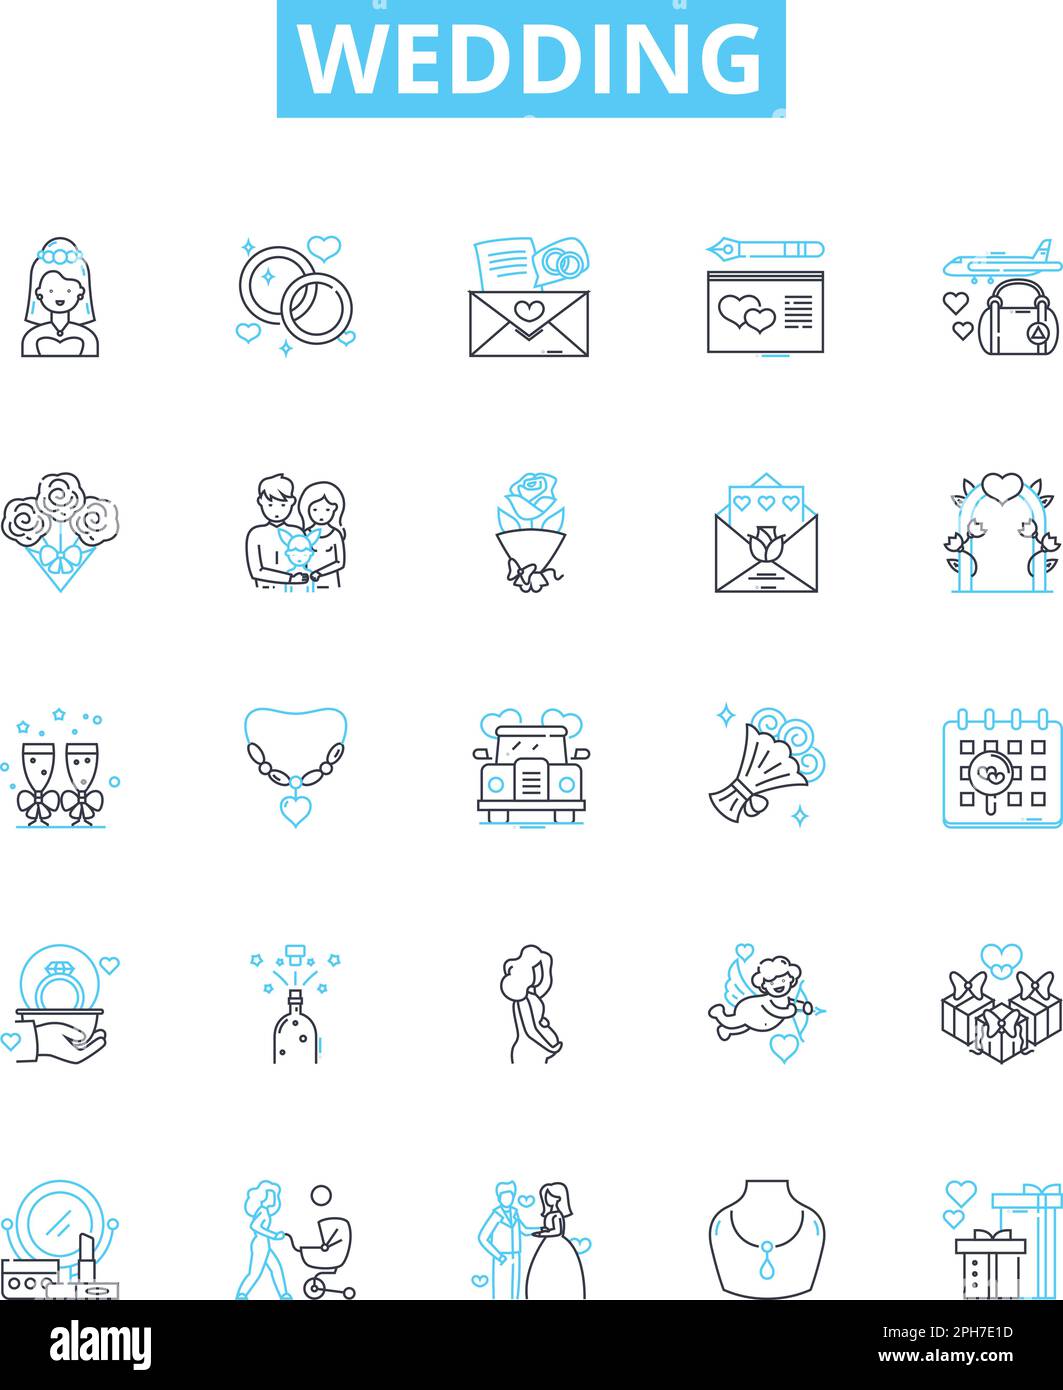 Wedding vector line icons set. Marriage, Nuptials, Ceremony, Bride, Groom, Vows, Celebration illustration outline concept symbols and signs Stock Vector